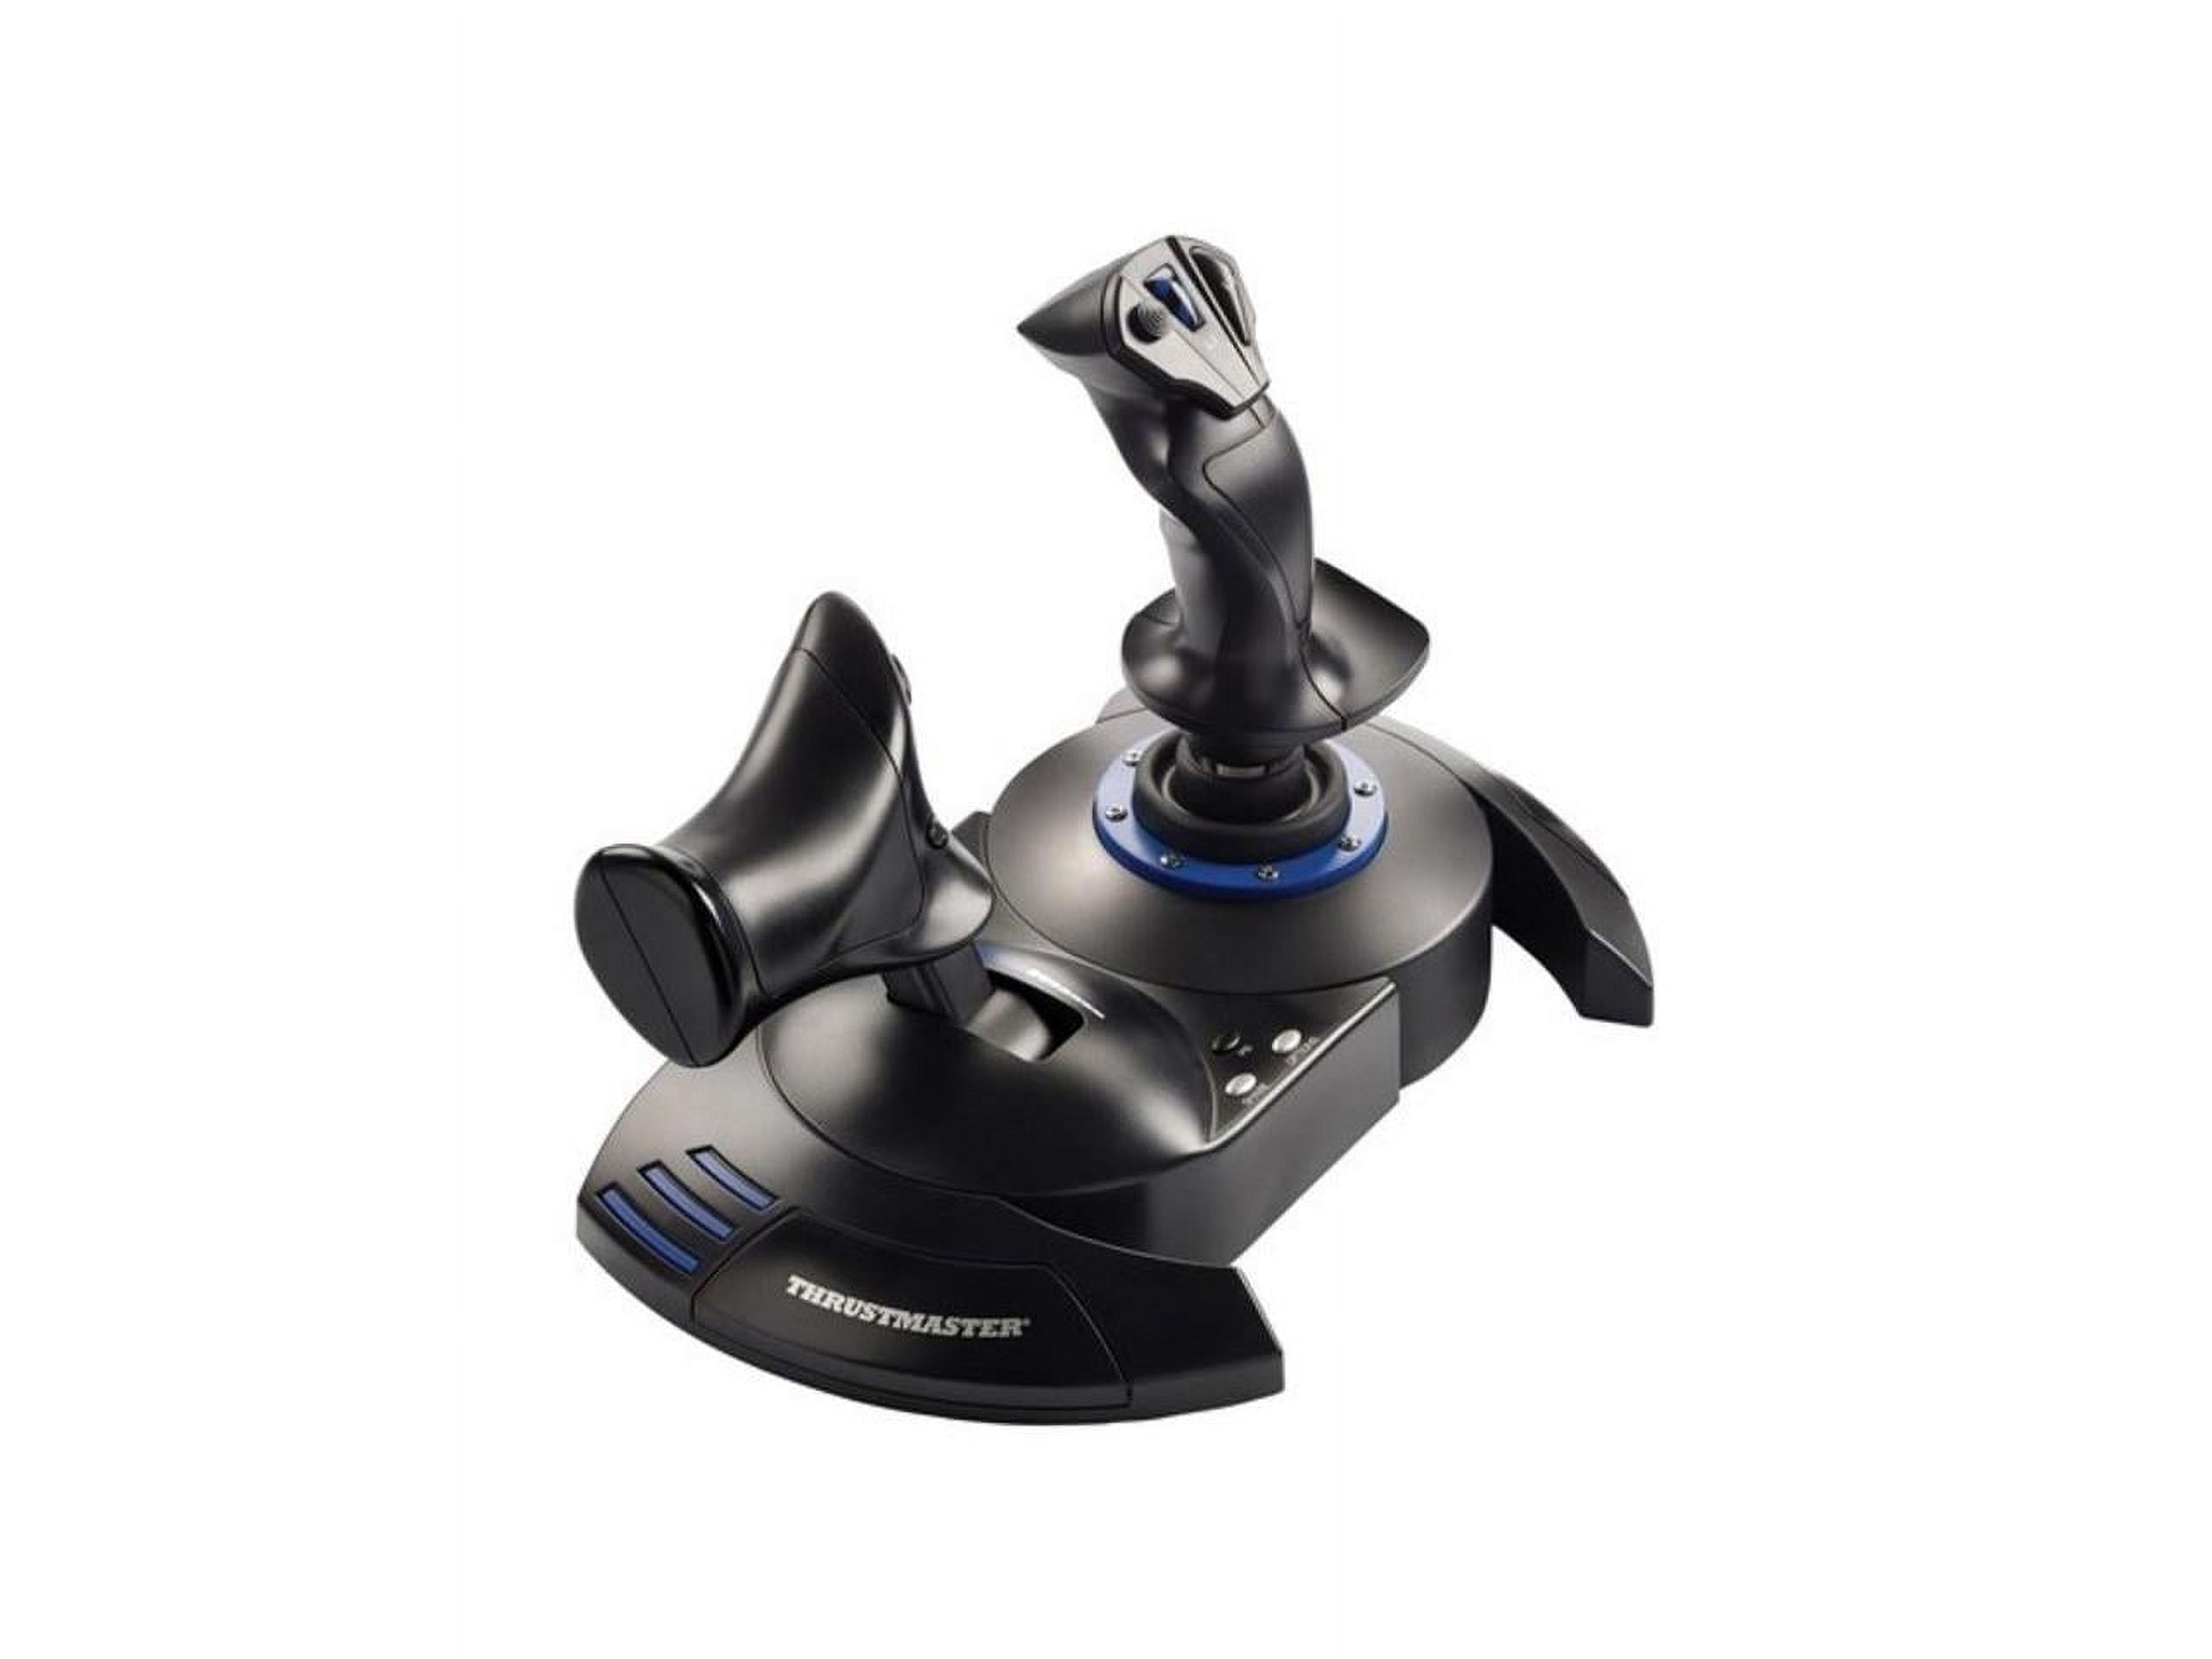 Thrustmaster T-Flight Hotas 4 - Joystick and Throttle - Wired - for 